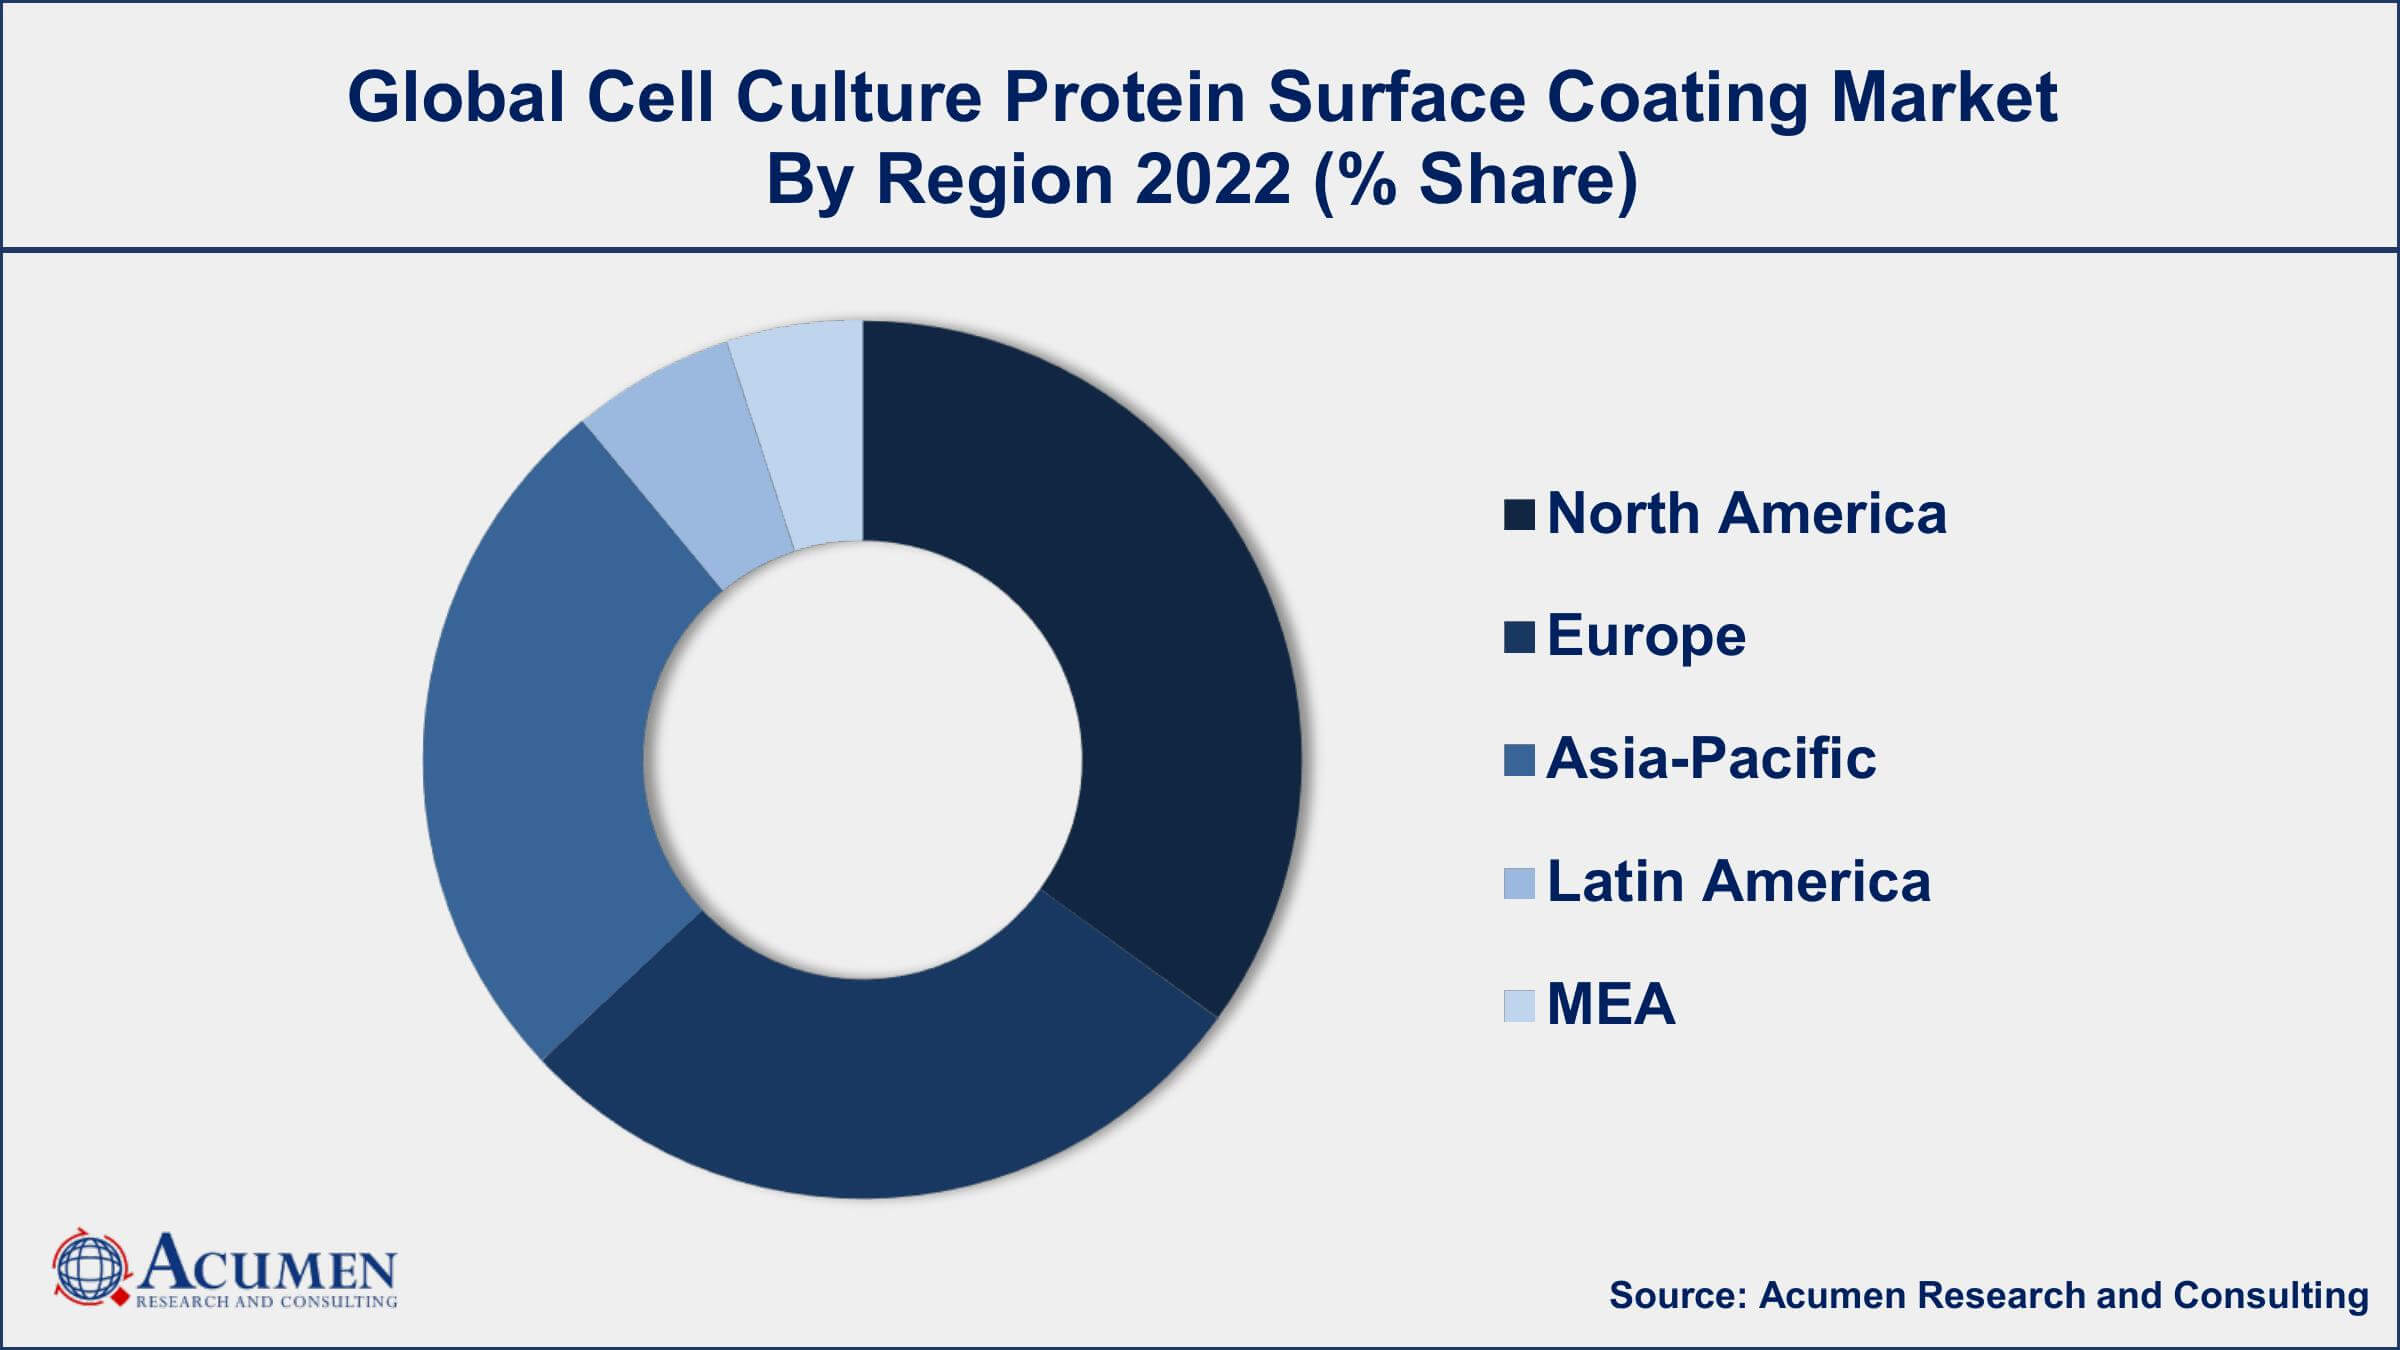 Cell Culture Protein Surface Coating Market Drivers